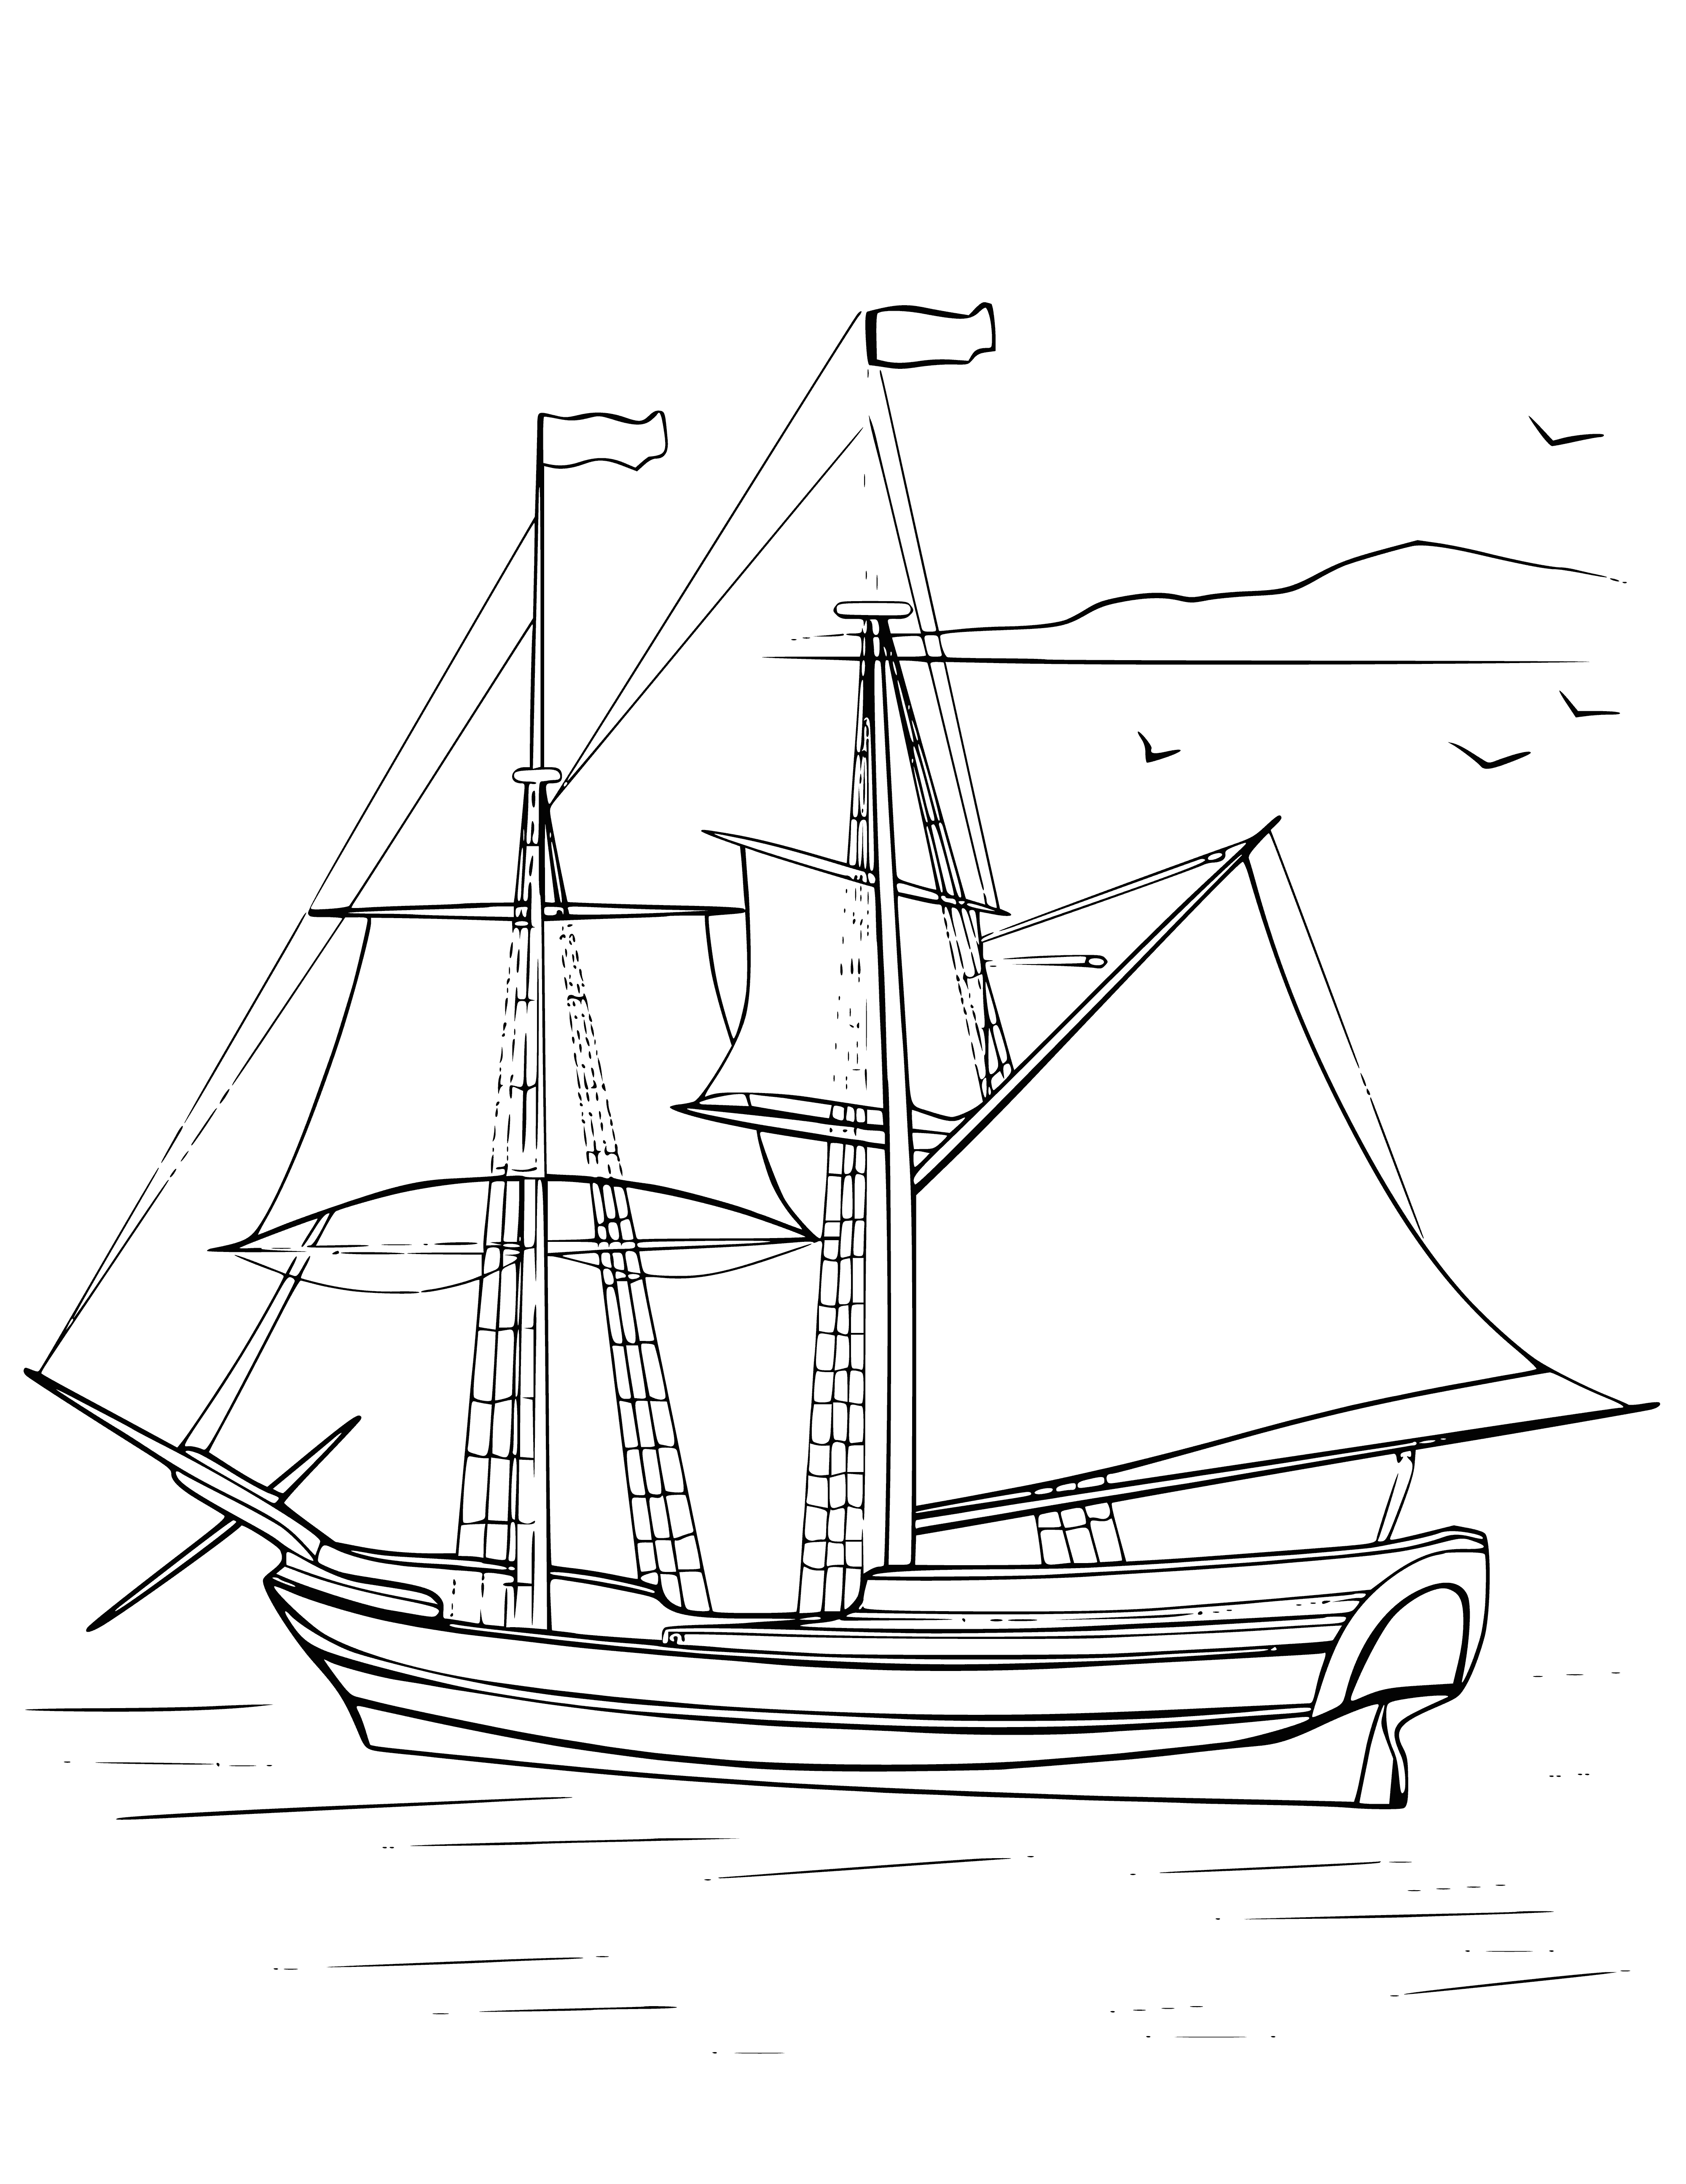 coloring page: A Brig is a 2-masted sailing vessel with square-rigged sails; smaller than ships w/ only 2 masts.